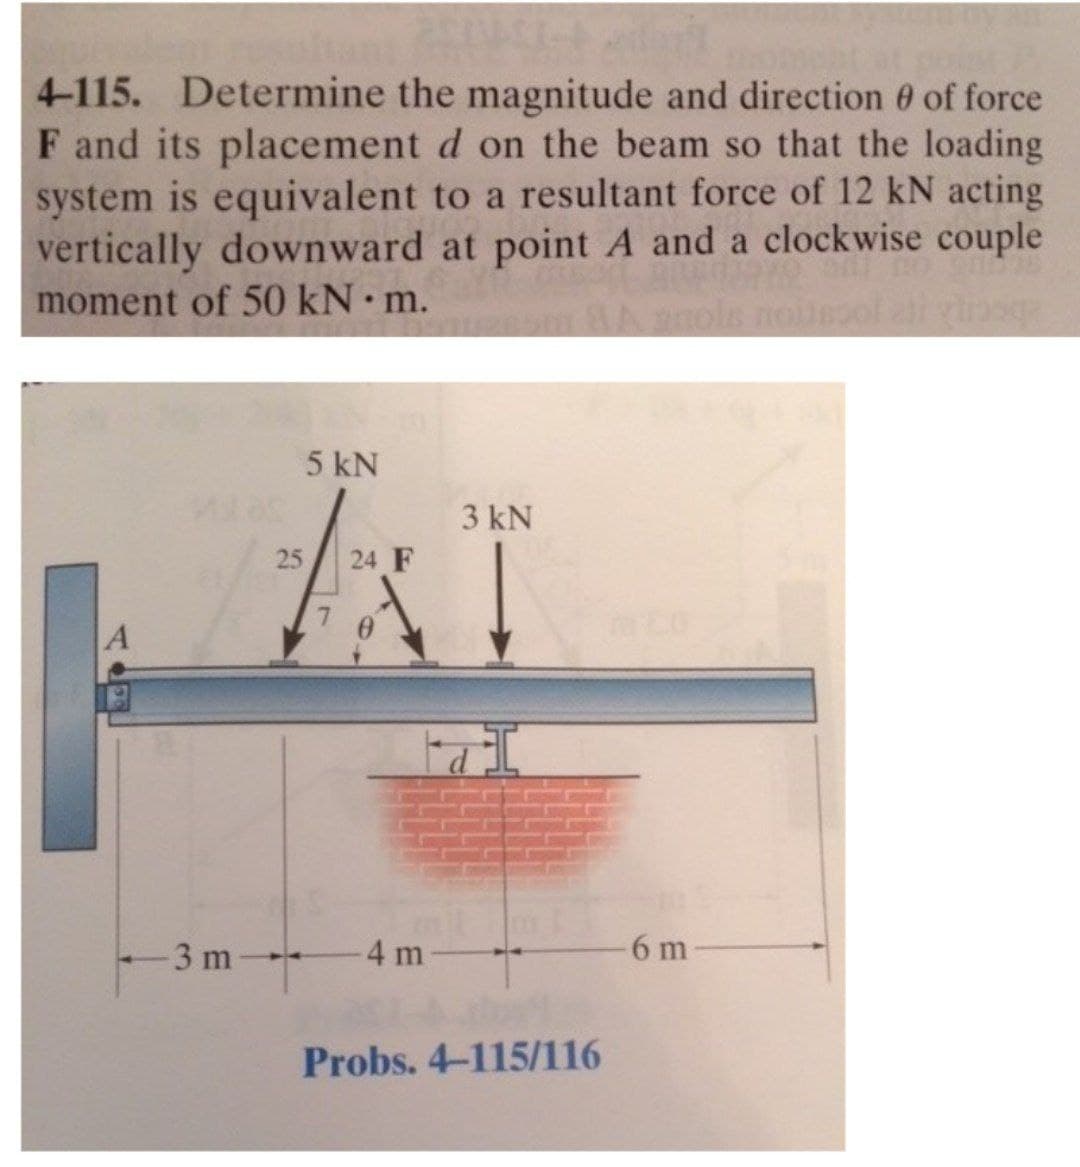 4-115. Determine the magnitude and direction 0 of force
F and its placement d on the beam so that the loading
system is equivalent to a resultant force of 12 kN acting
vertically downward at point A and a clockwise couple
moment of 50 kN m.
5 kN
3 kN
25
24 F
3 m
4 m
6 m
Probs. 4-115/116
